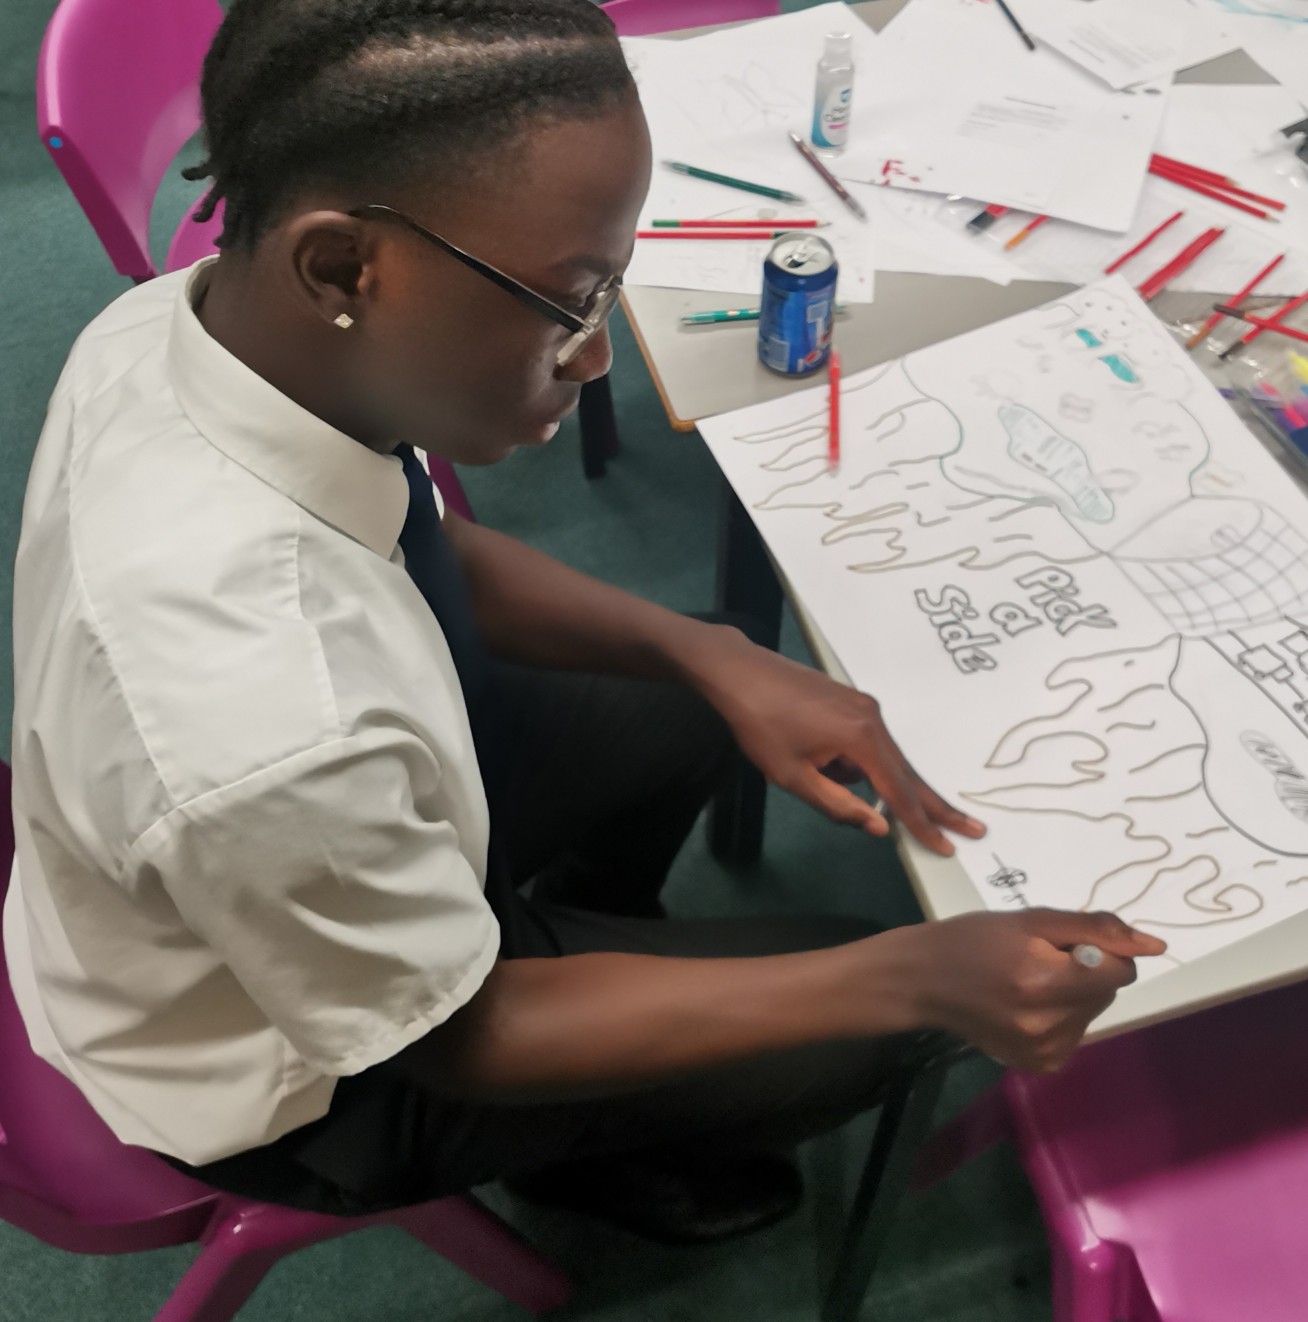 Photo shows a Black boy in school uniform sitting at a desk drawing on a large sheet of paper, it reads 'pick a side' and shows a melting glacier